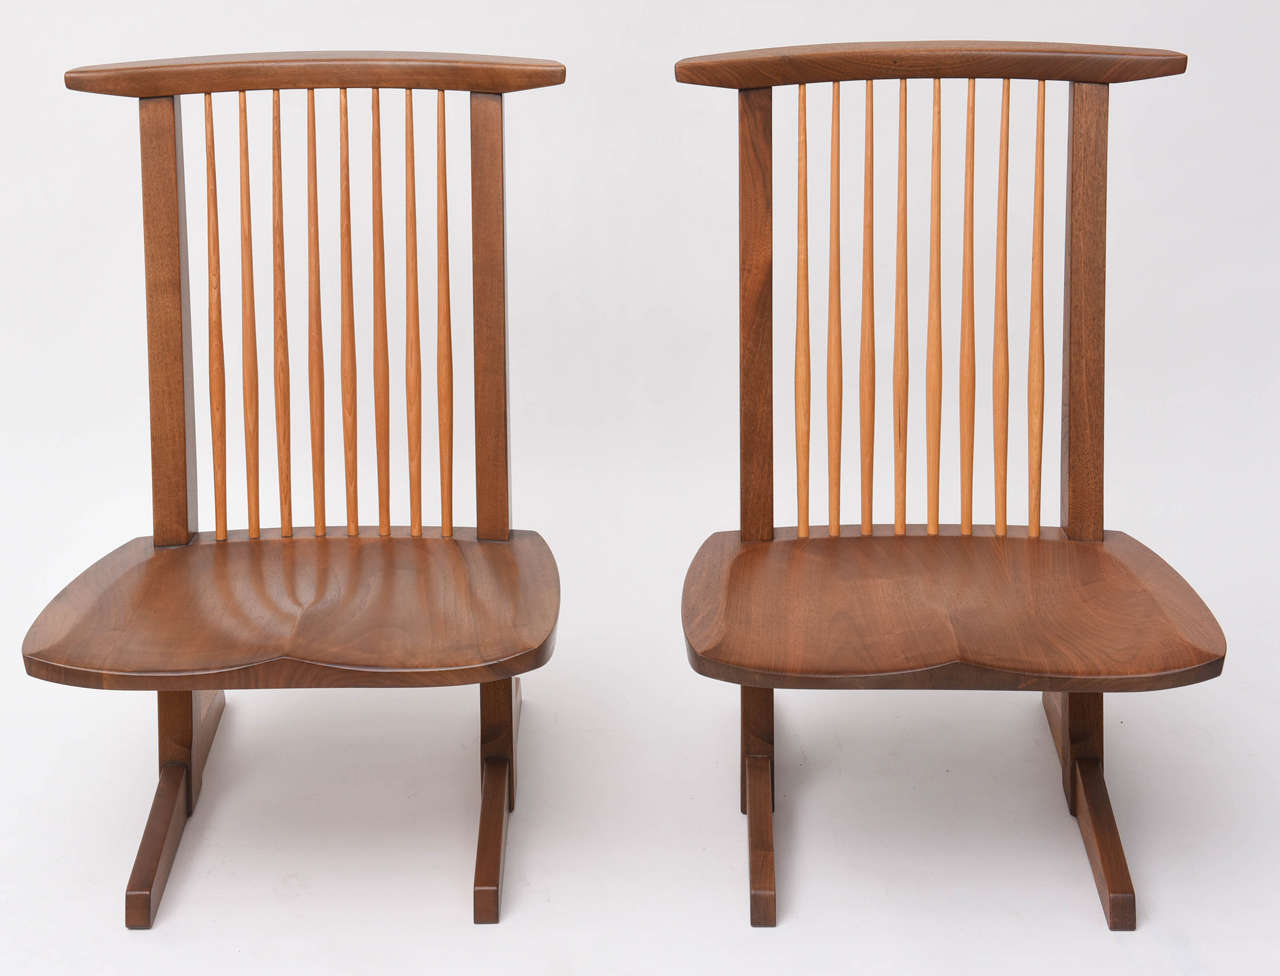 George Nakashima Conoid low chairs. A rarely seen design from the studio.